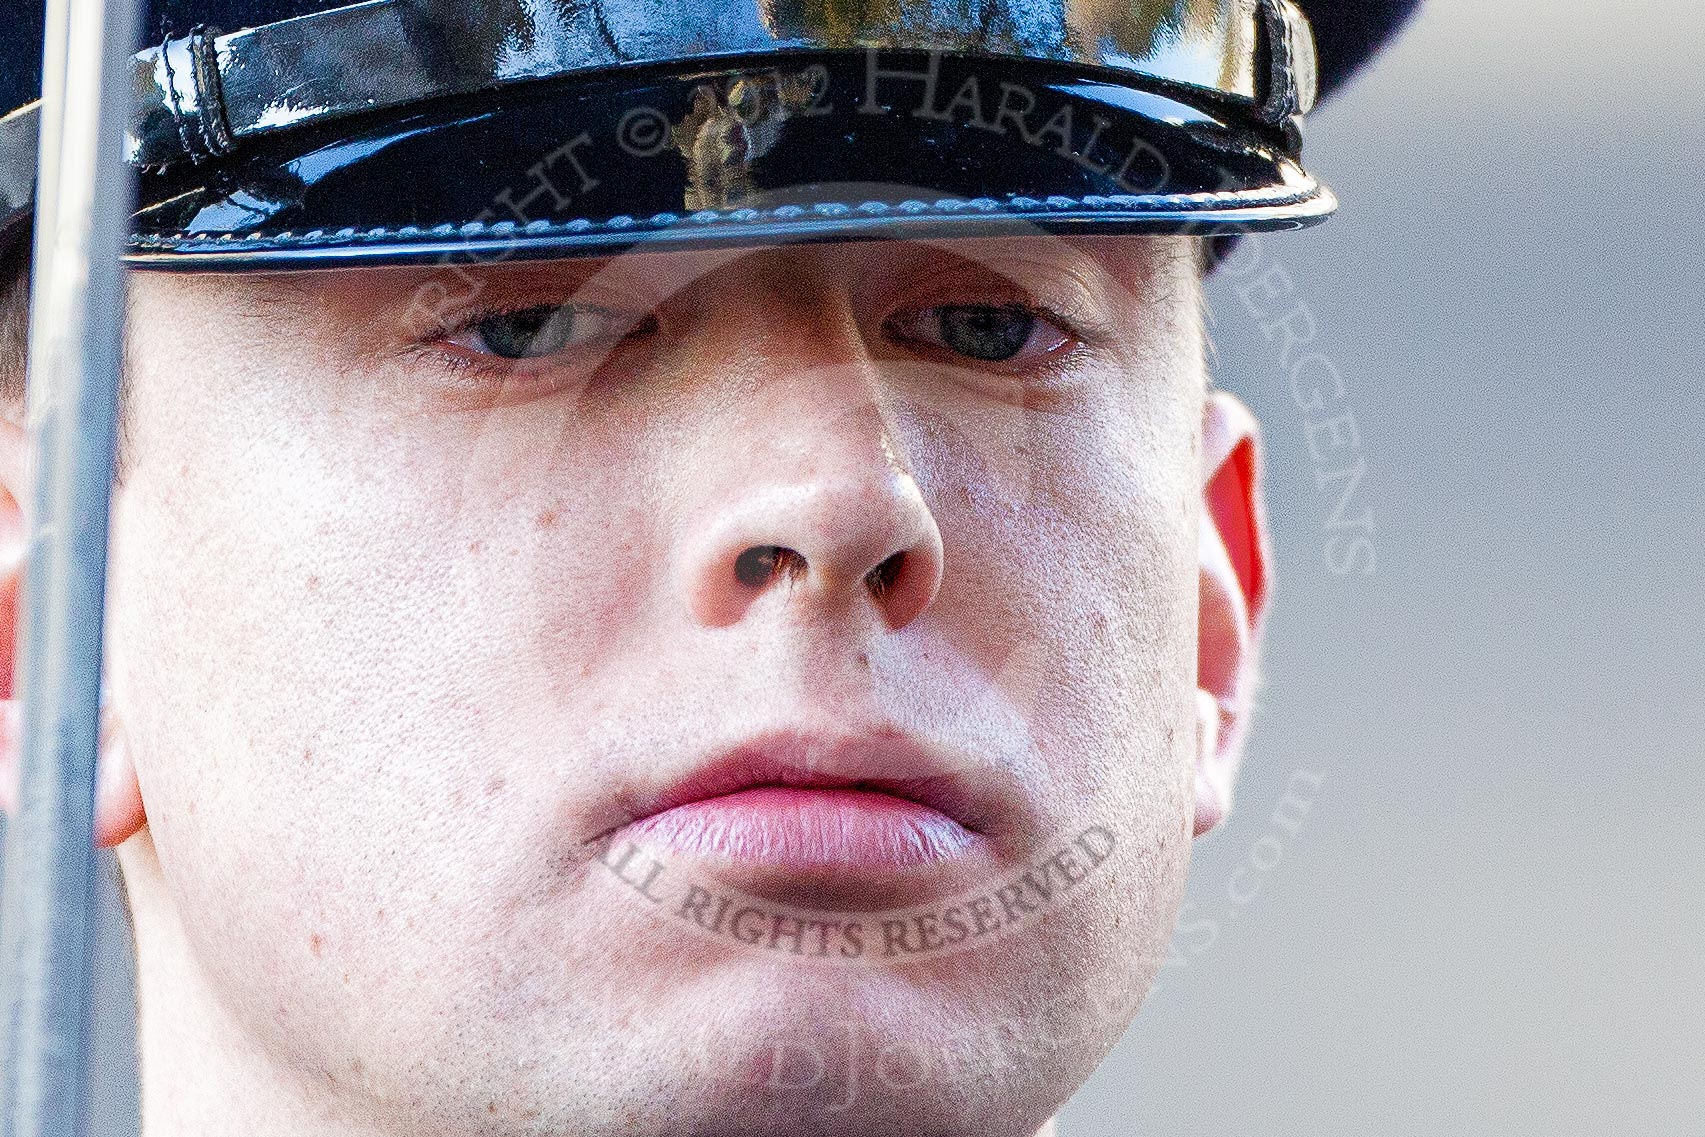 A young Lieutenant from the Royal Logistic Corps - a "face in the crowd" that represents for me the spmbre mood of the occasion.